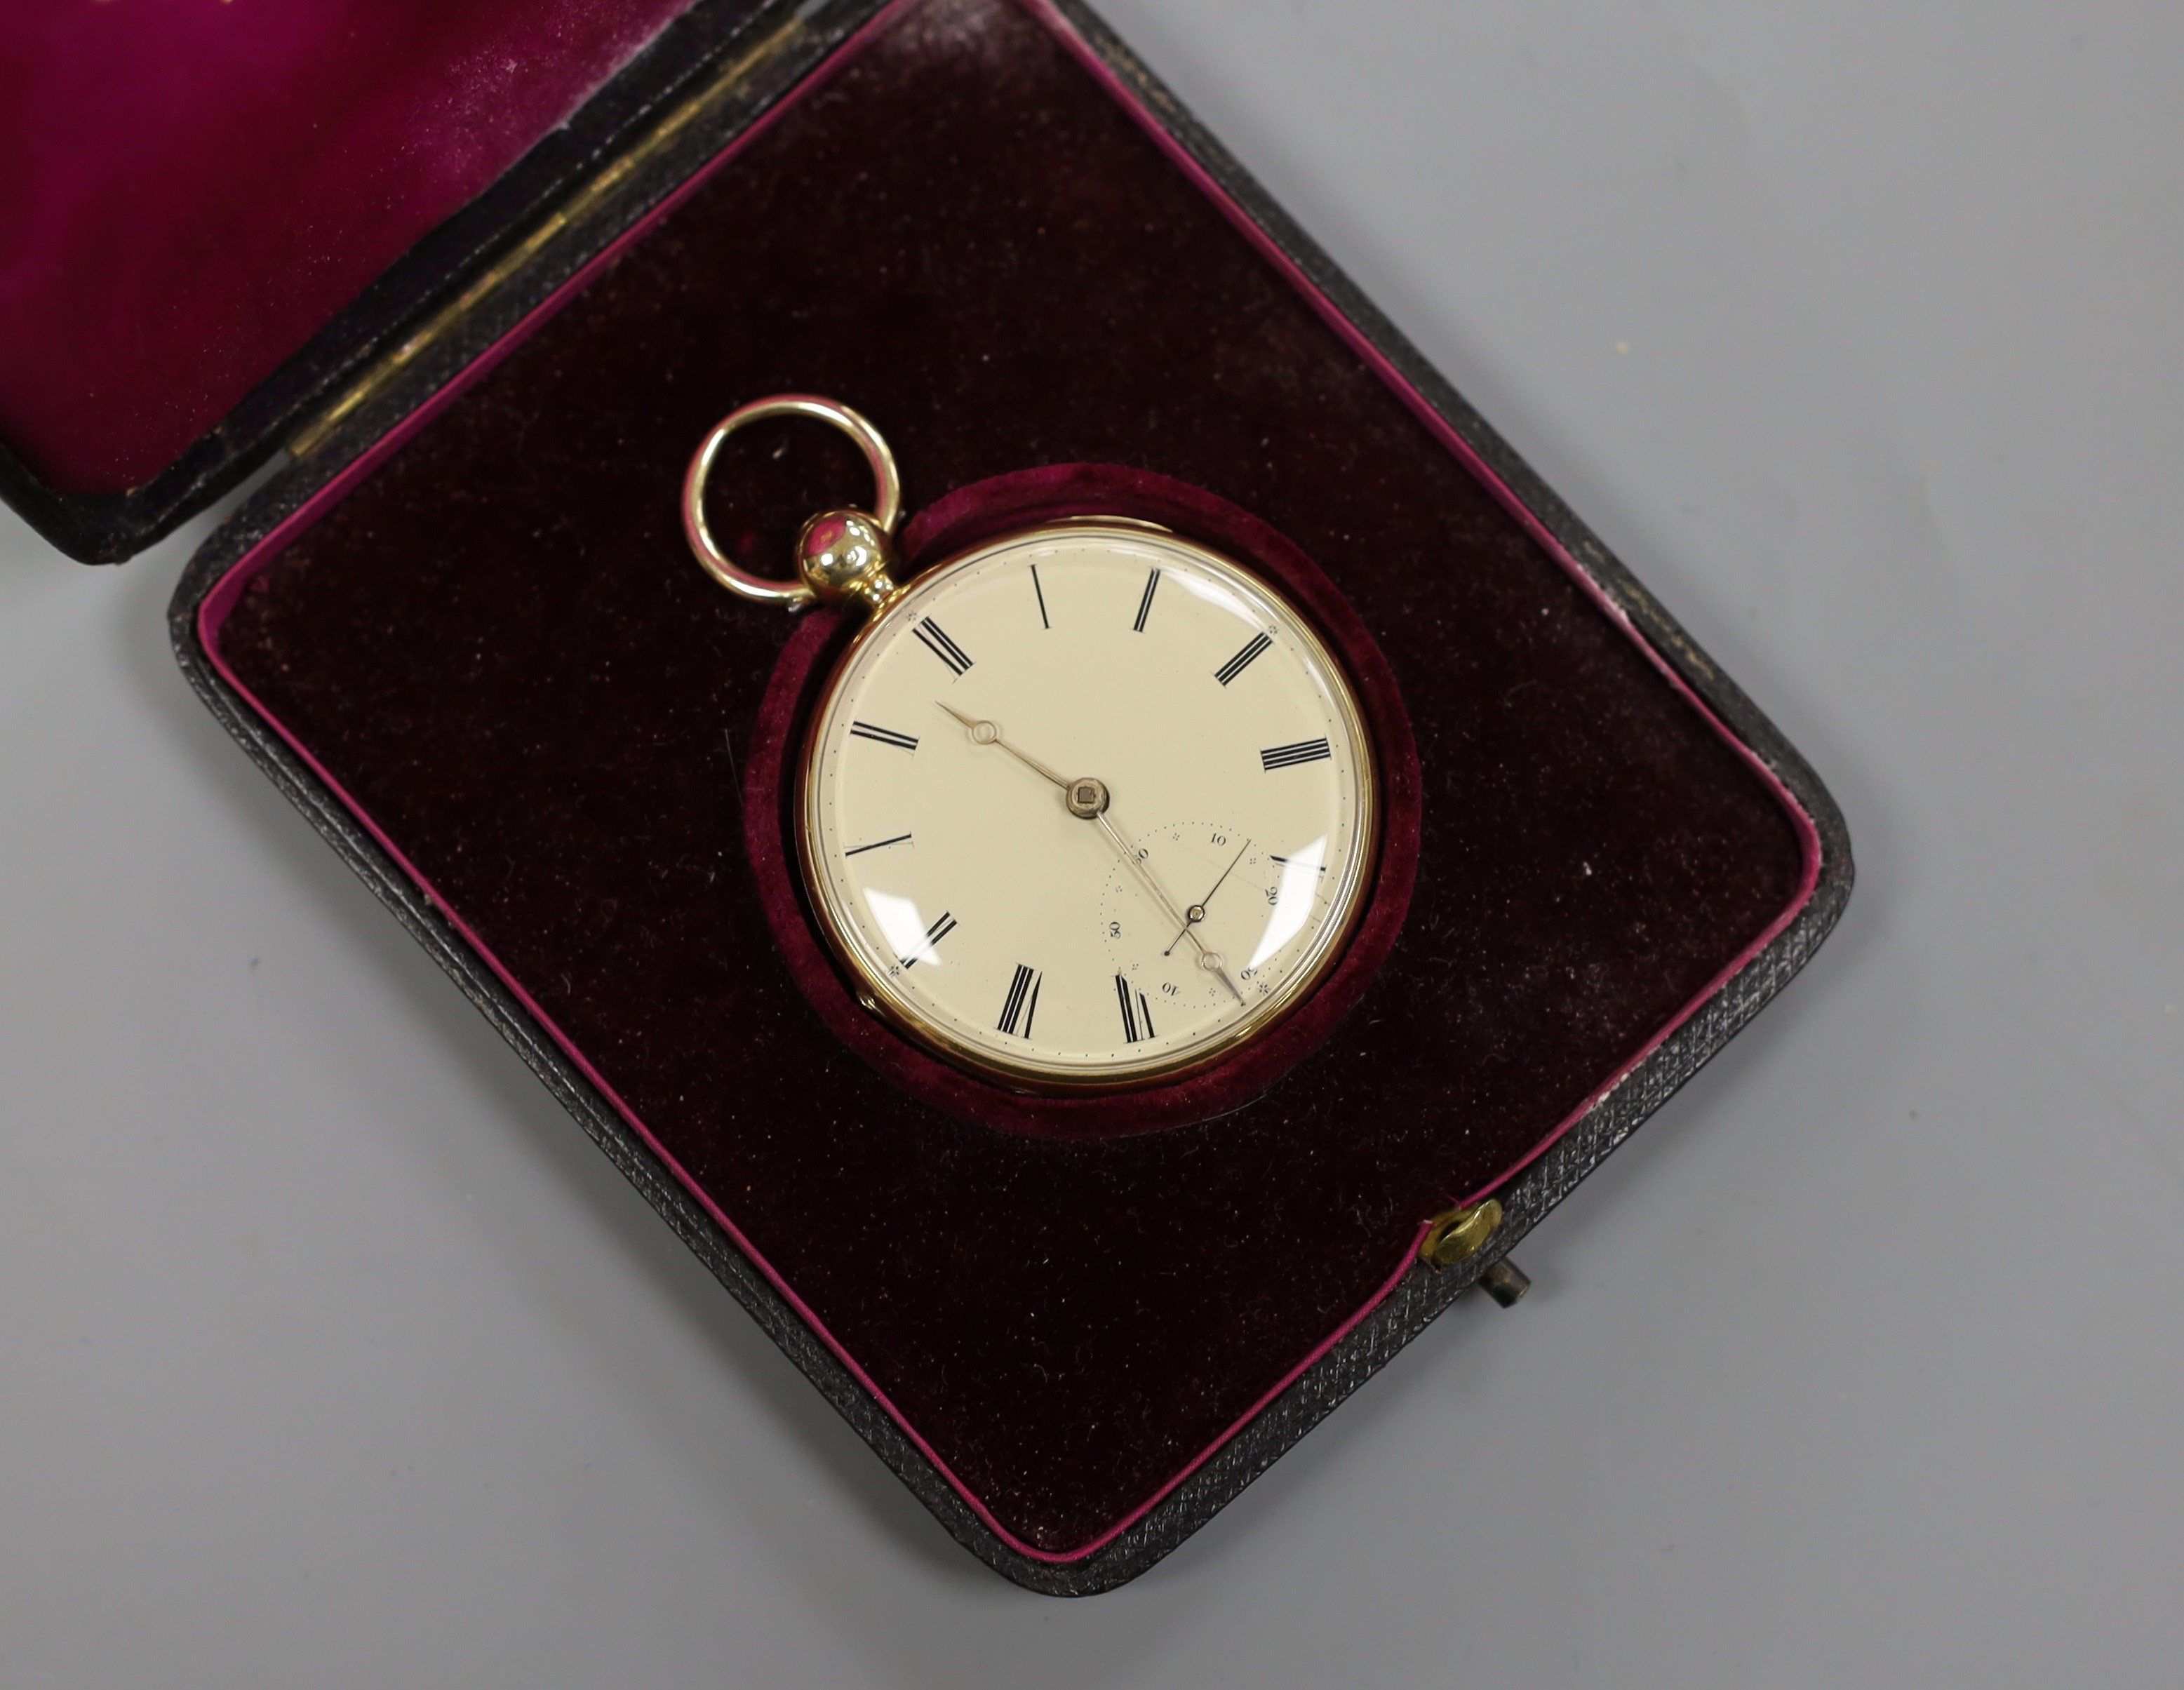 An 18ct gold open faced keywind pocket watch, by K.H. Jones, Liverpool, with Roman dial and subsidiary seconds, case diameter 46mm